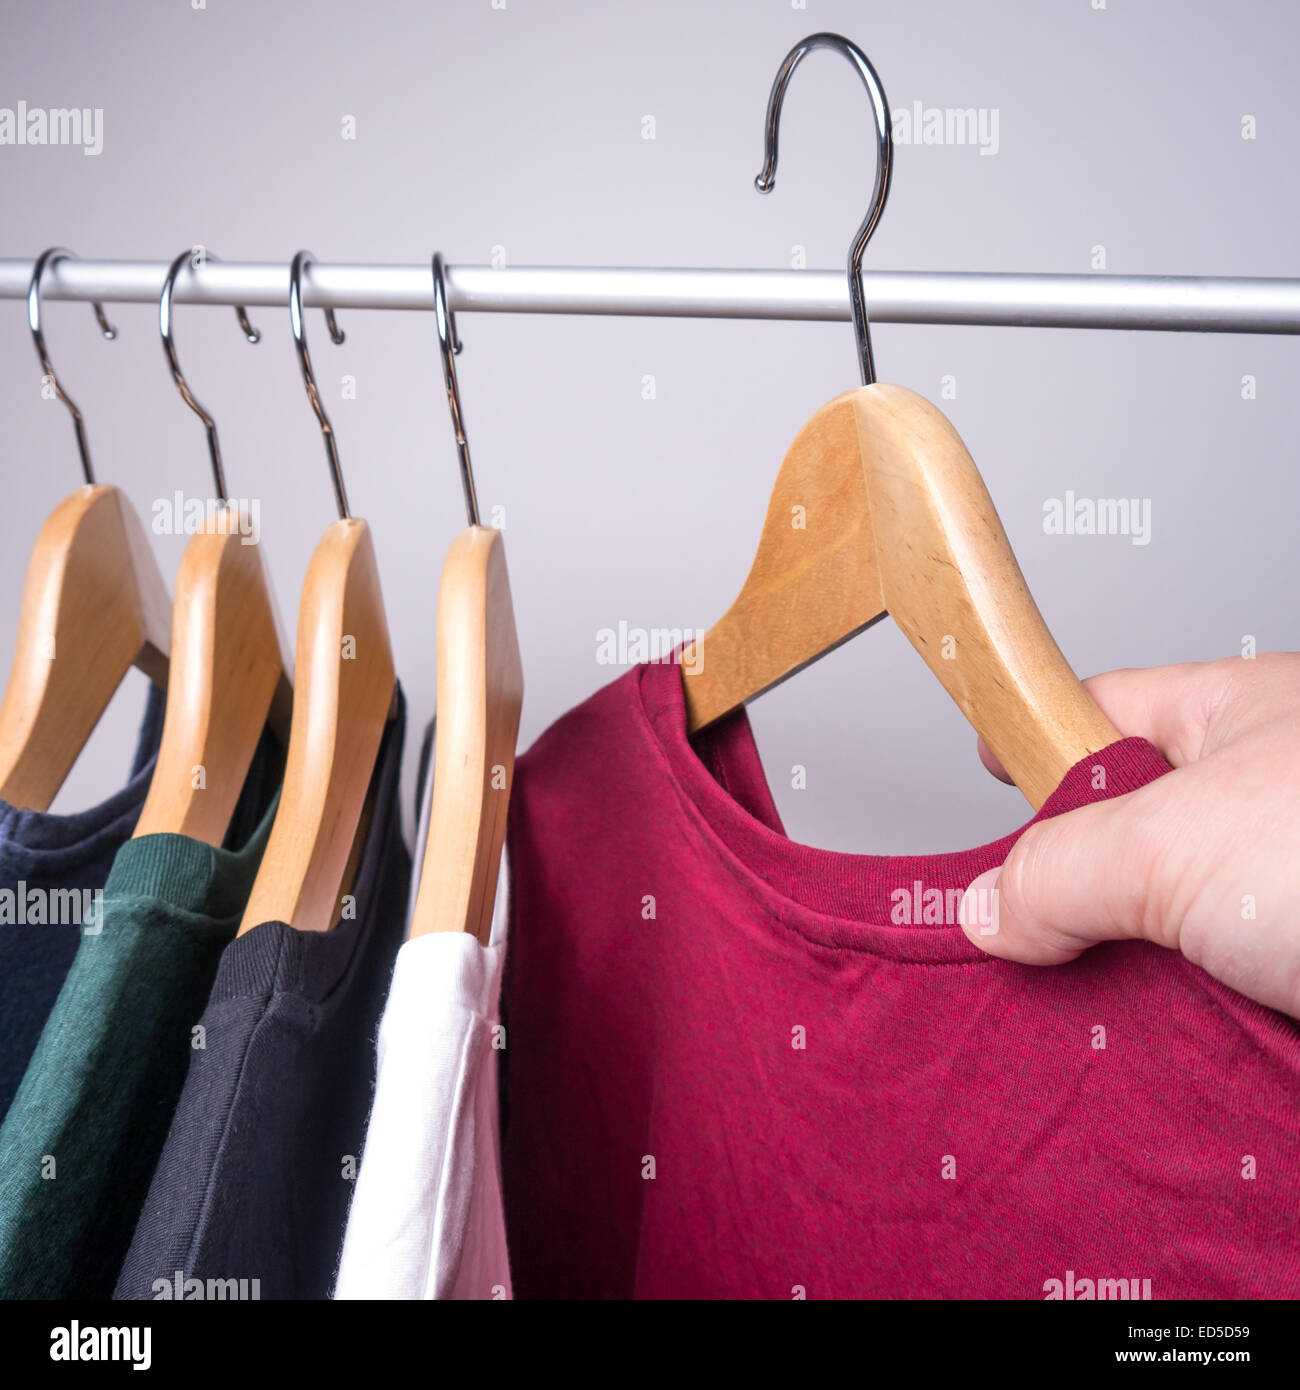 hangers with t-shirts in different colors Stock Photo